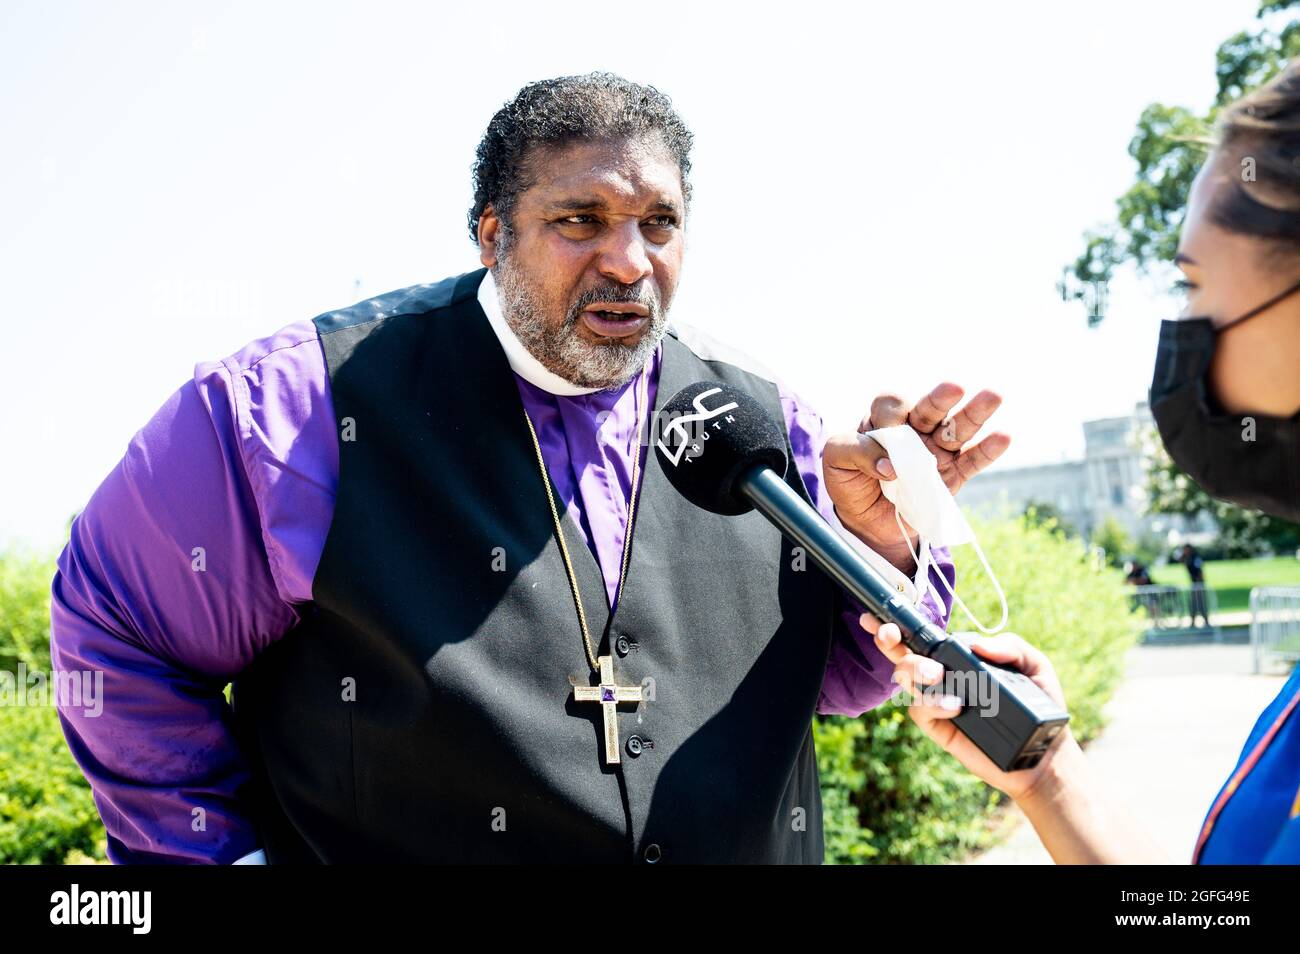 Washington, U.S. 25th Aug, 2021. August 25, 2021 - Washington, DC, United States: Reverend William Barber II speaking to a reporter outside the U.S. Capitol. (Photo by Michael Brochstein/Sipa USA) Credit: Sipa USA/Alamy Live News Stock Photo